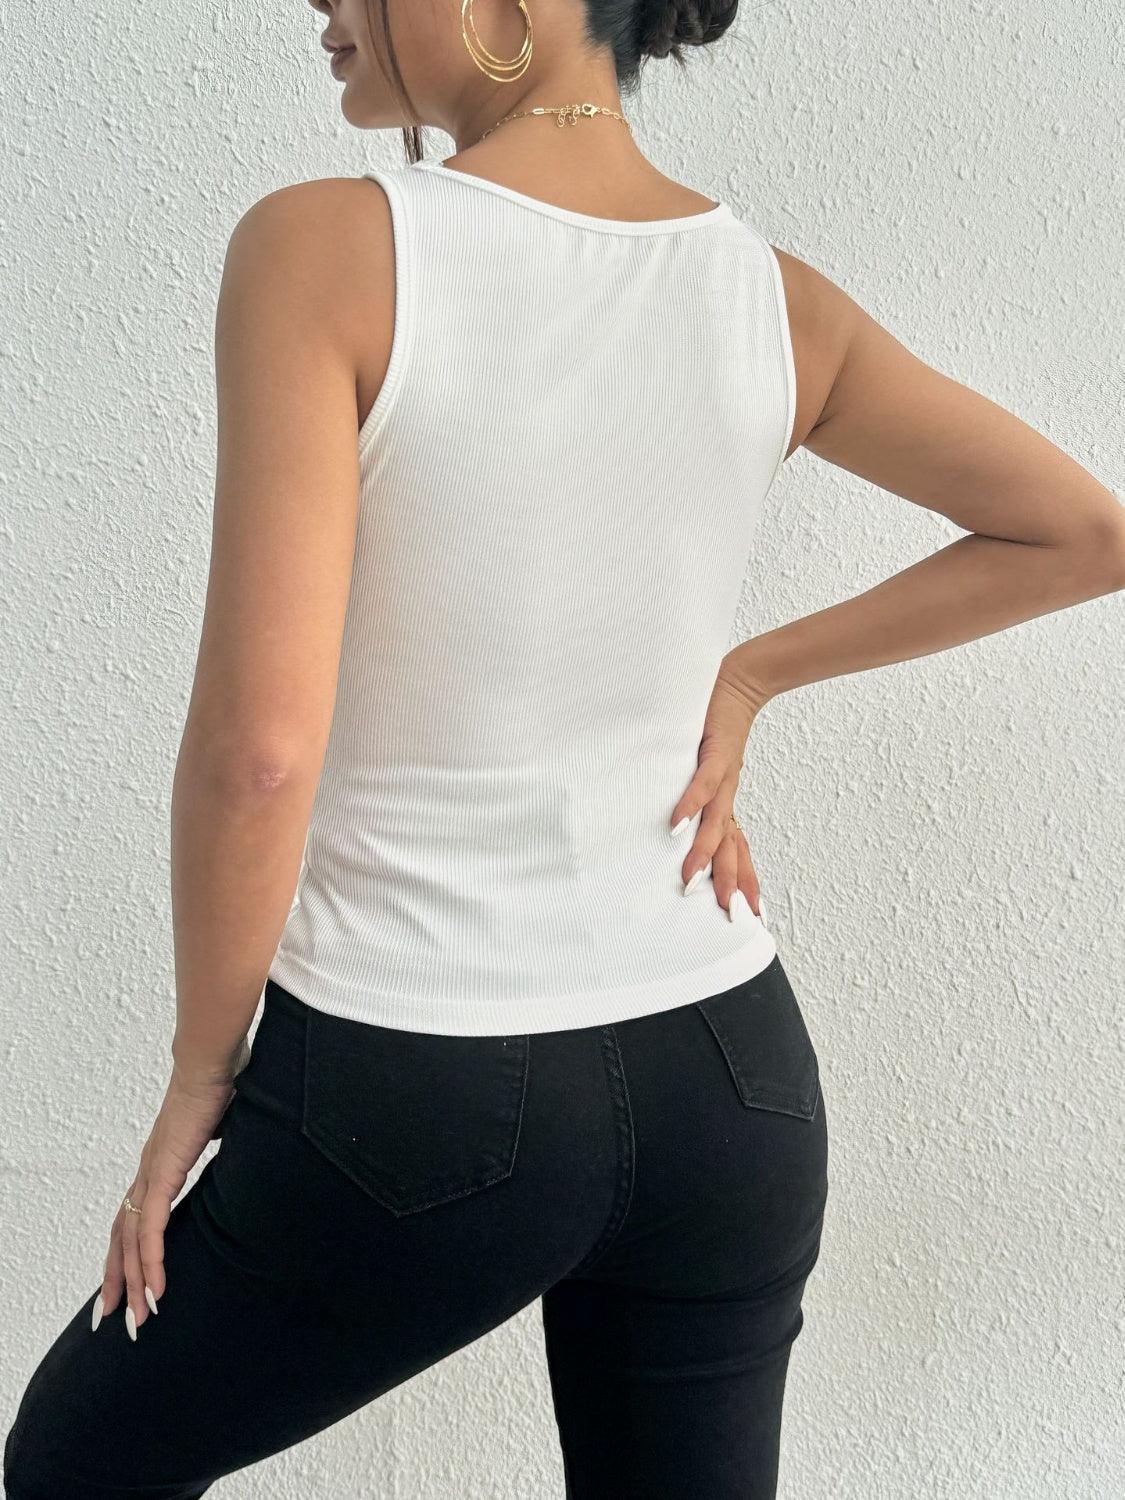 a woman in black pants and a white tank top